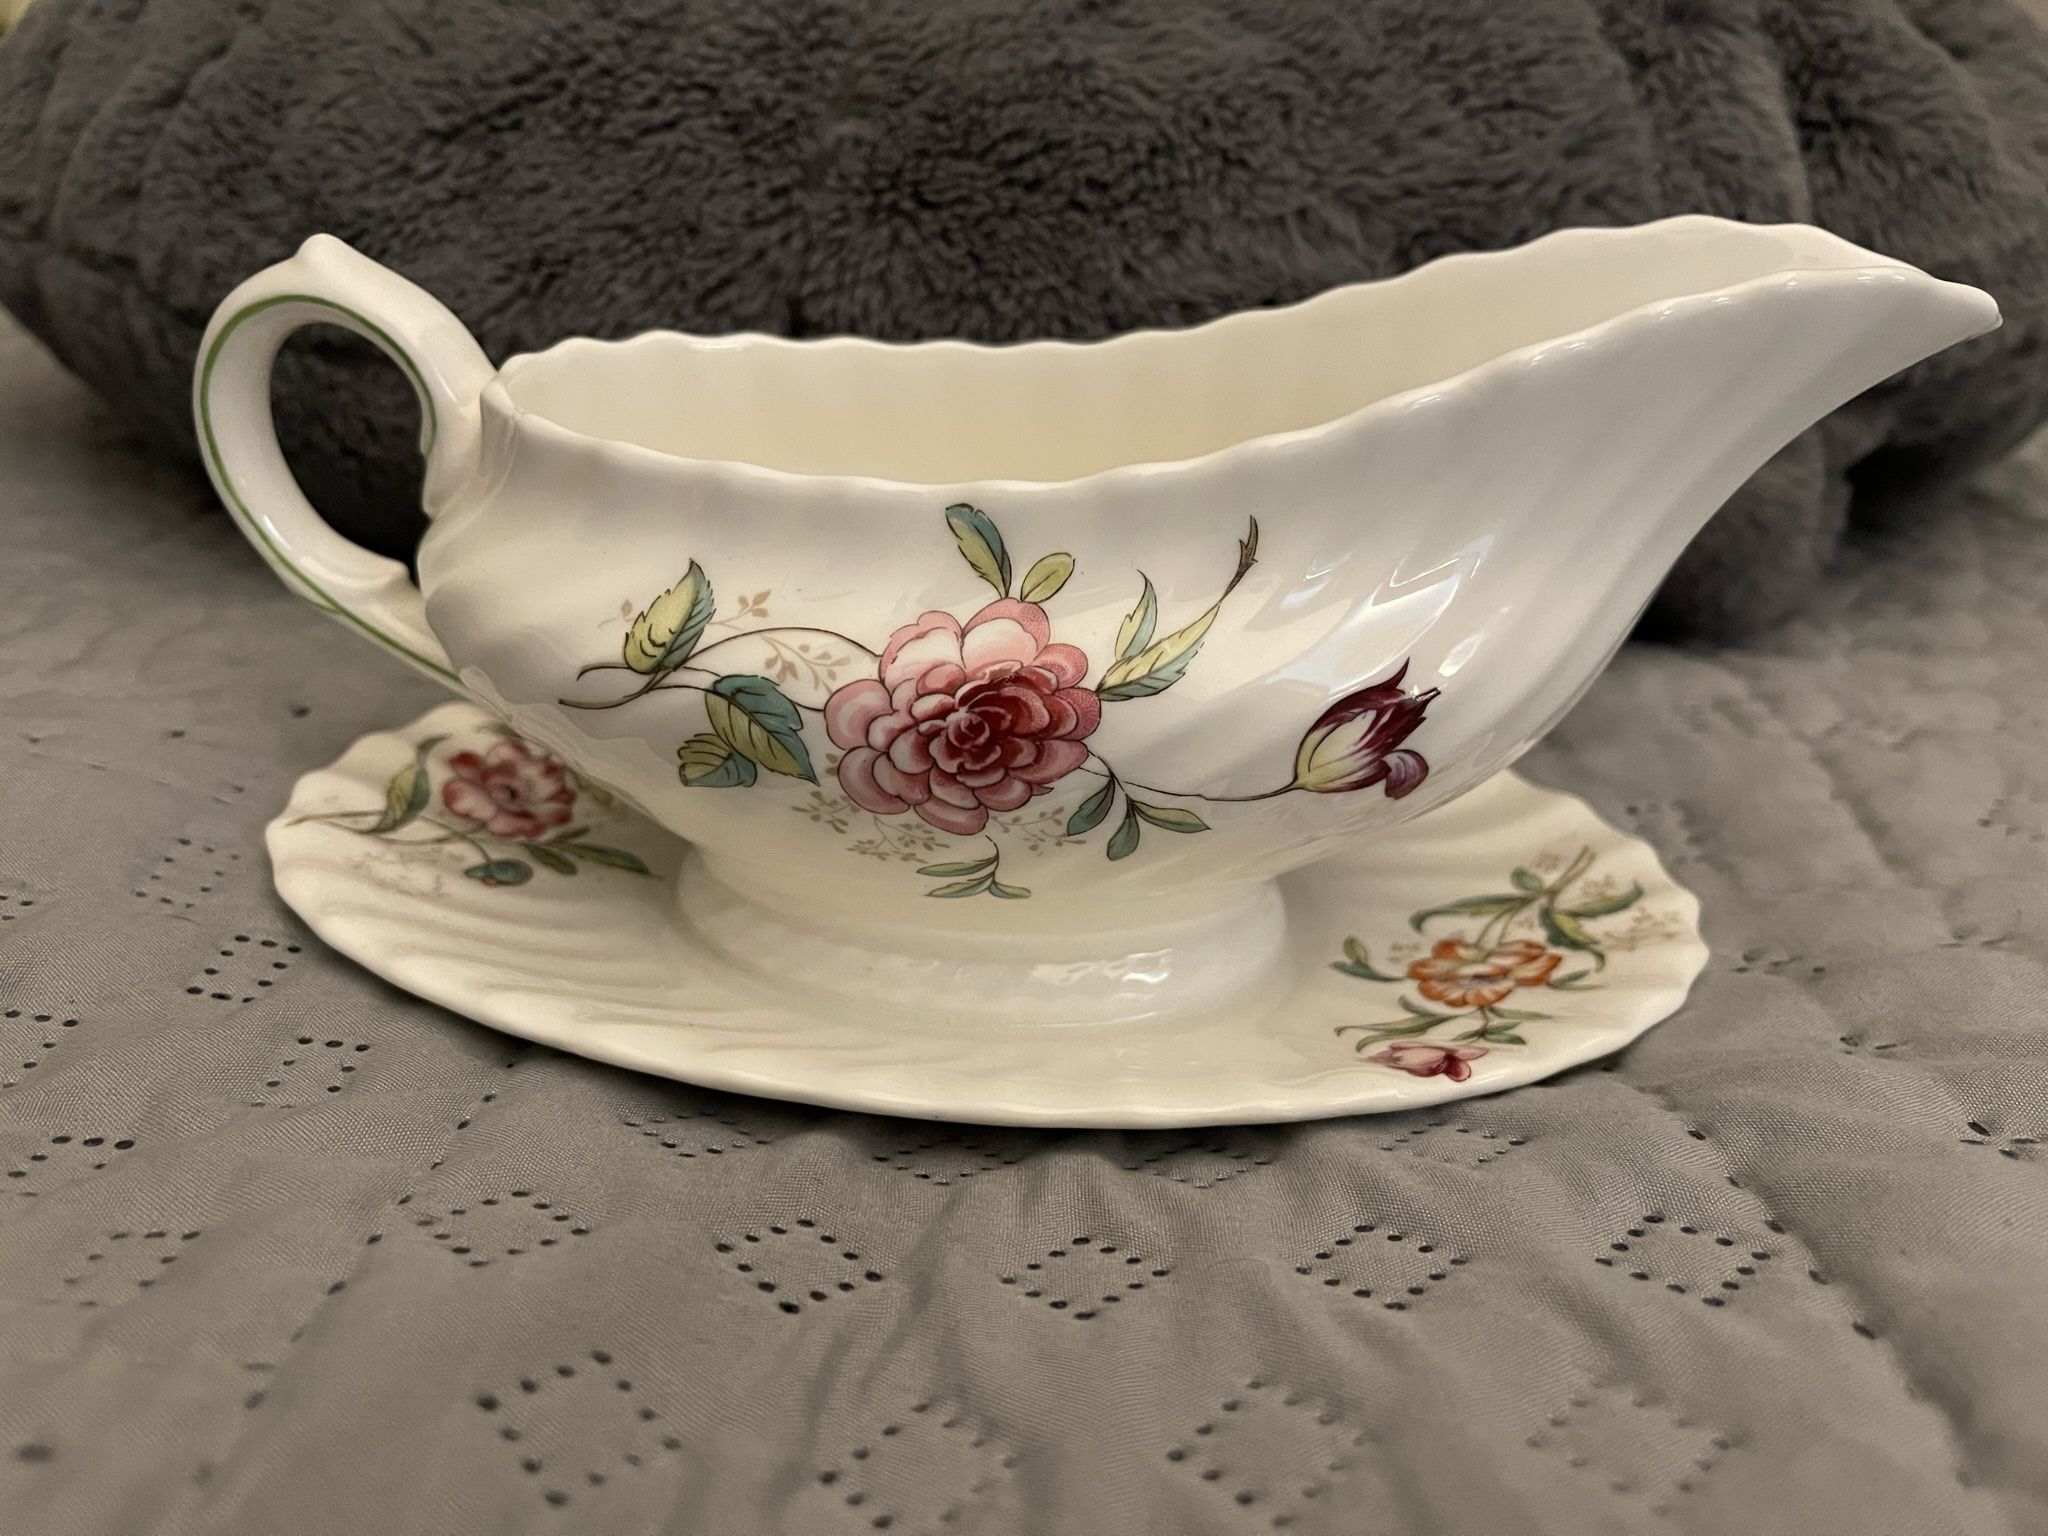 Vintage Royal Doulton Clovelly Gravy Boat & Liner. Fine bone China, made in England. Mint condition.